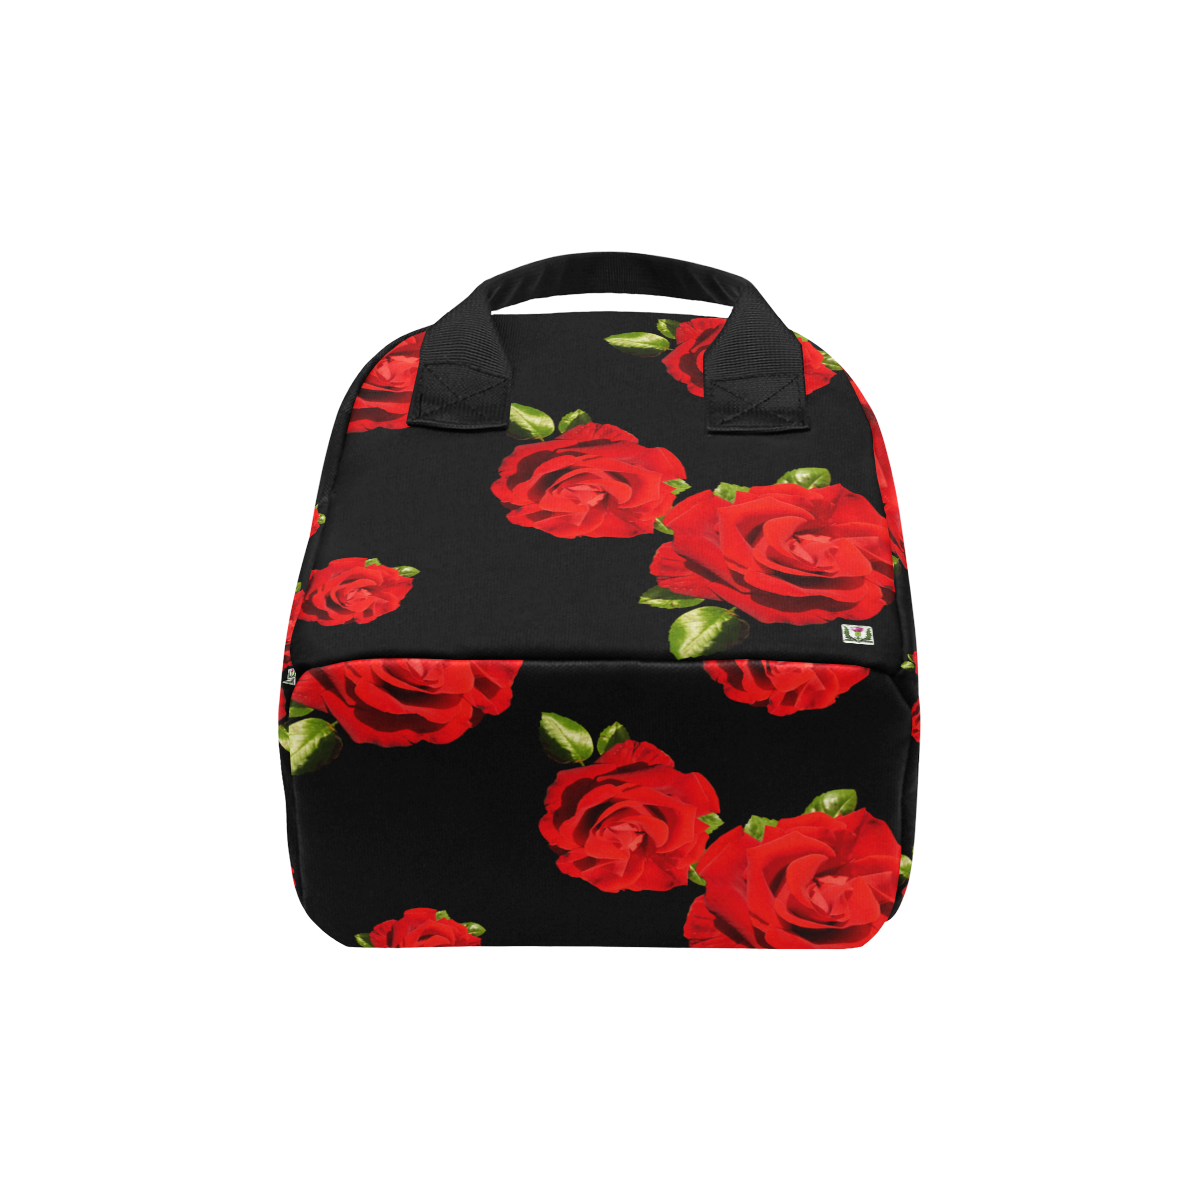 Fairlings Delight's Black Luxury Collection- Red Rose Zipper Lunch Bag 53086 Zipper Lunch Bag (Model 1689)